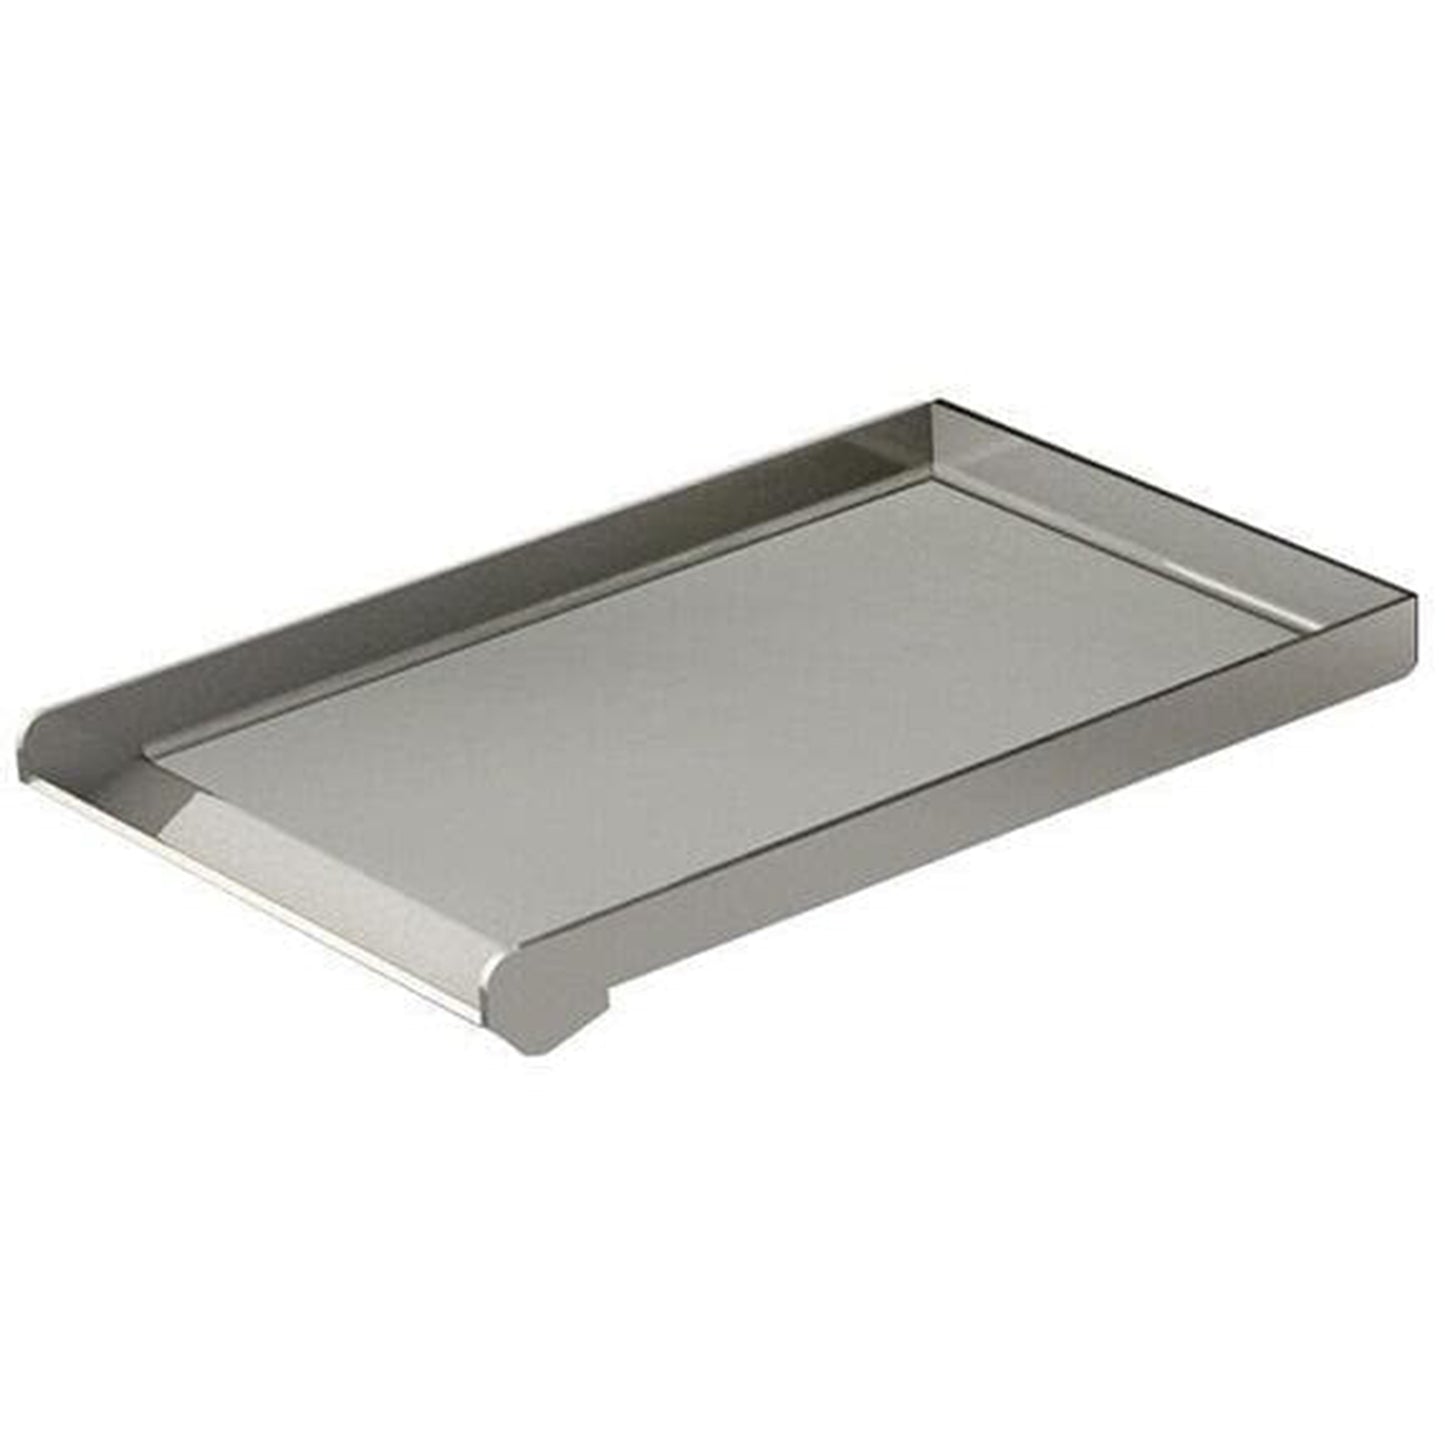 Artisan Drop-In Griddle Plate for Artisan Gas Grills